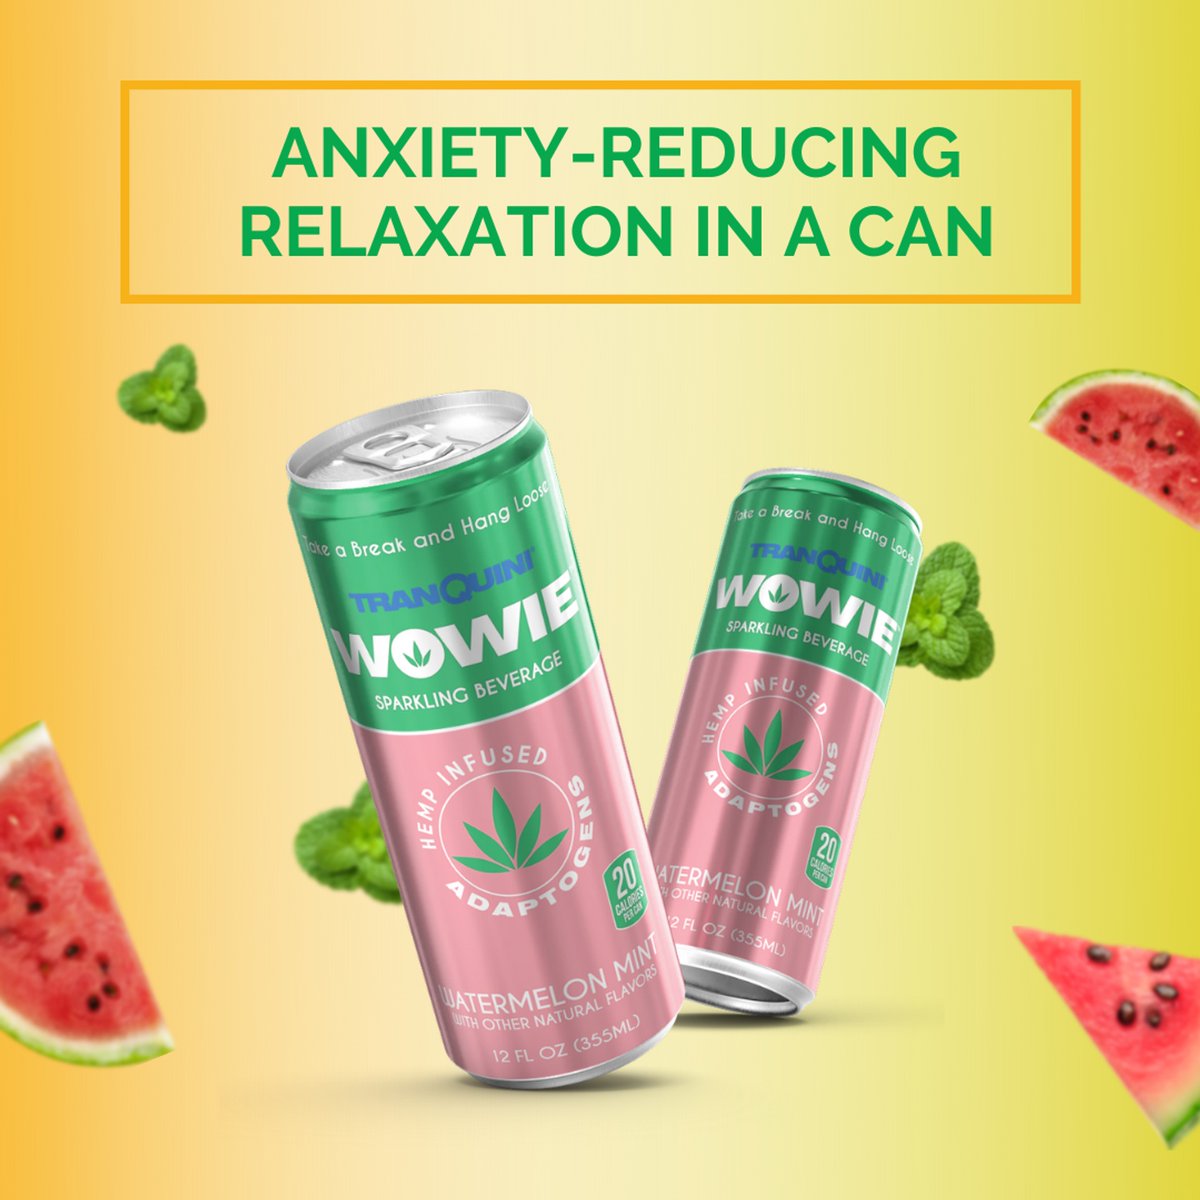 We all have days where we need a boost of anxiety-reducing relaxation + this is the perfect solution. Shop here: bit.ly/3sIGRnY #chamomileflower #greenteaextract #greenteaholic #greenteadiet #greenteaherbal #nonalcoholic #refreshingdrink #colddrink #drinksofinstagram